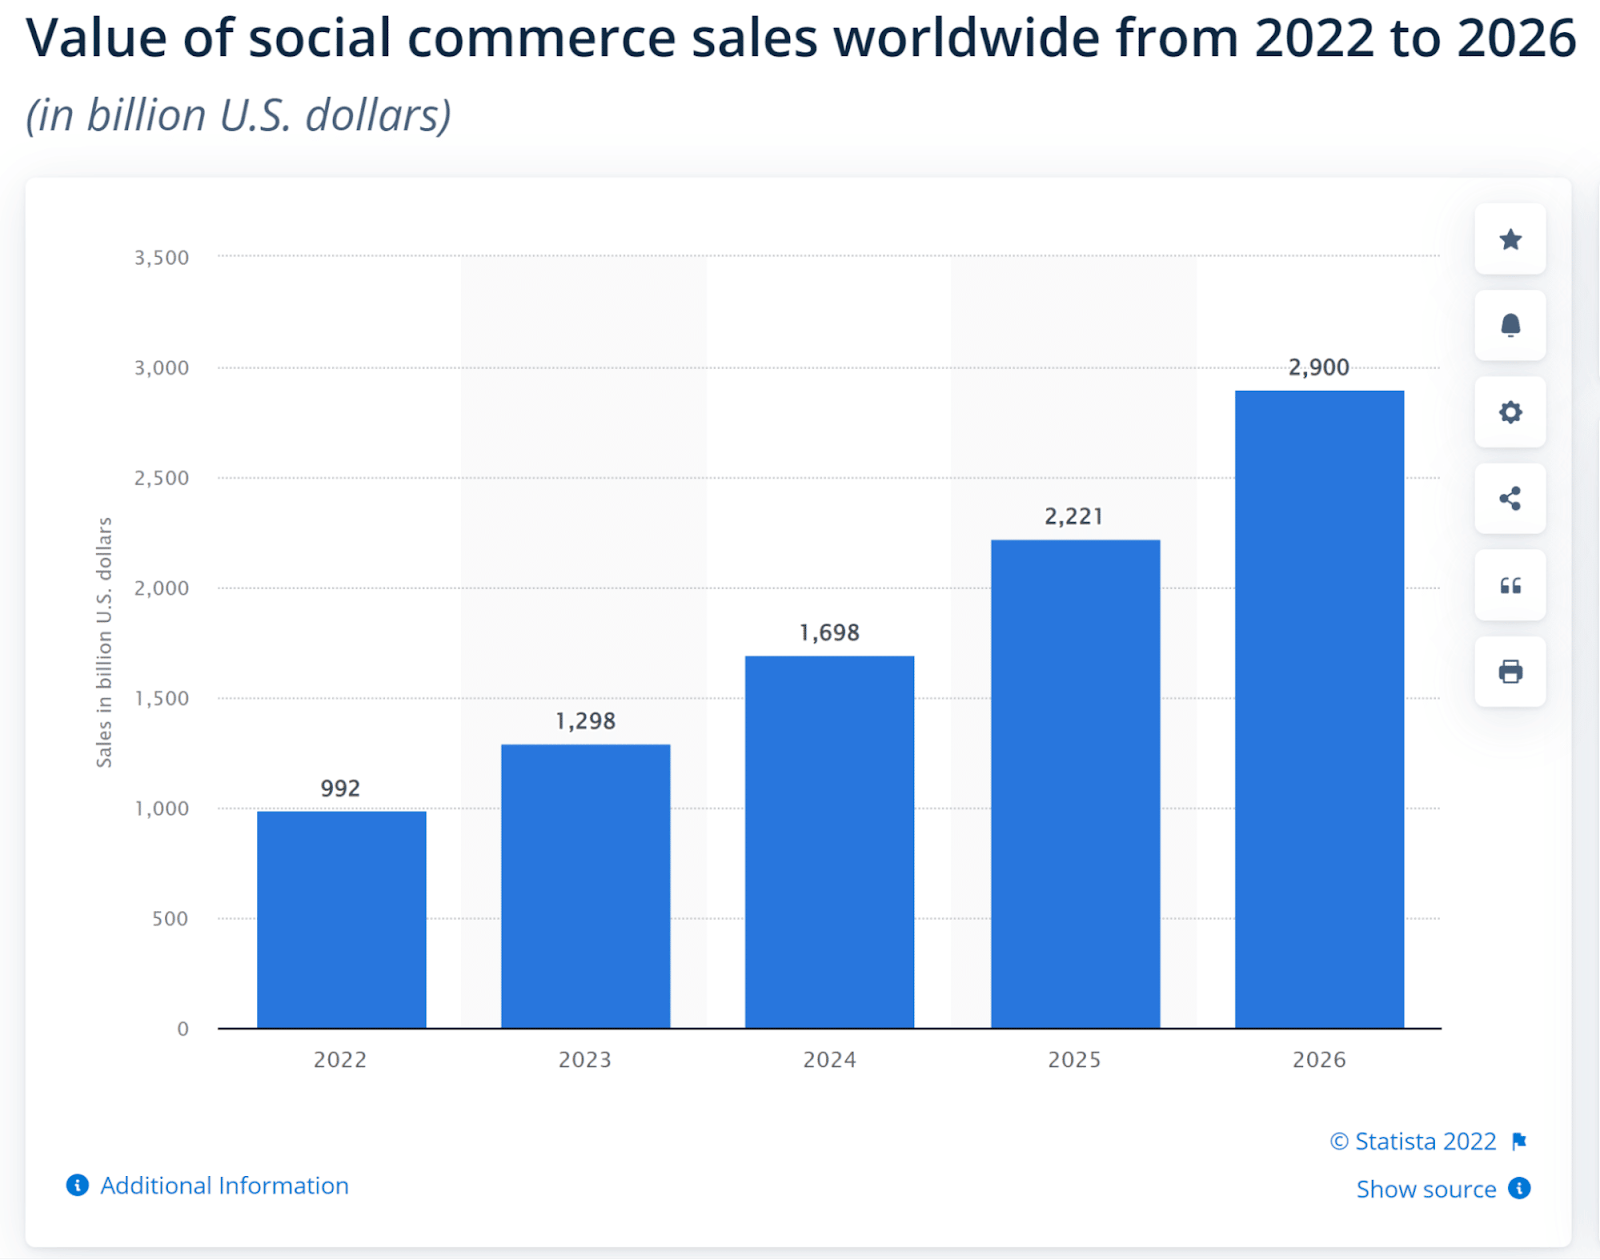 Statista socaial commerce sales from 2022 to 2026